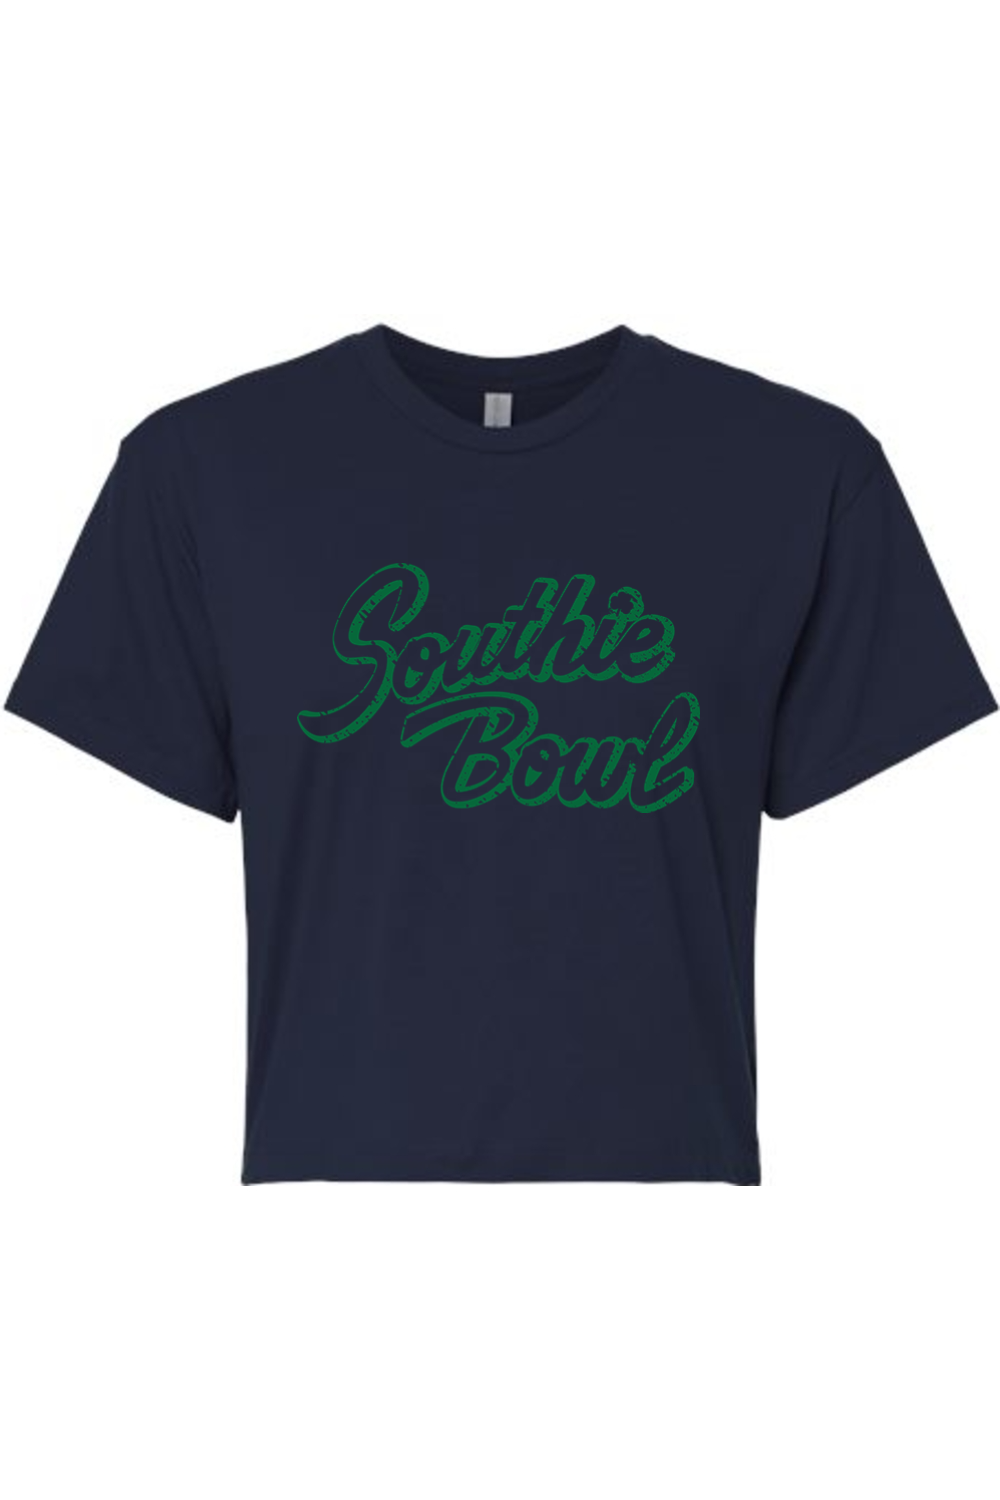 Southie Bowl Clover Cropped T-Shirt